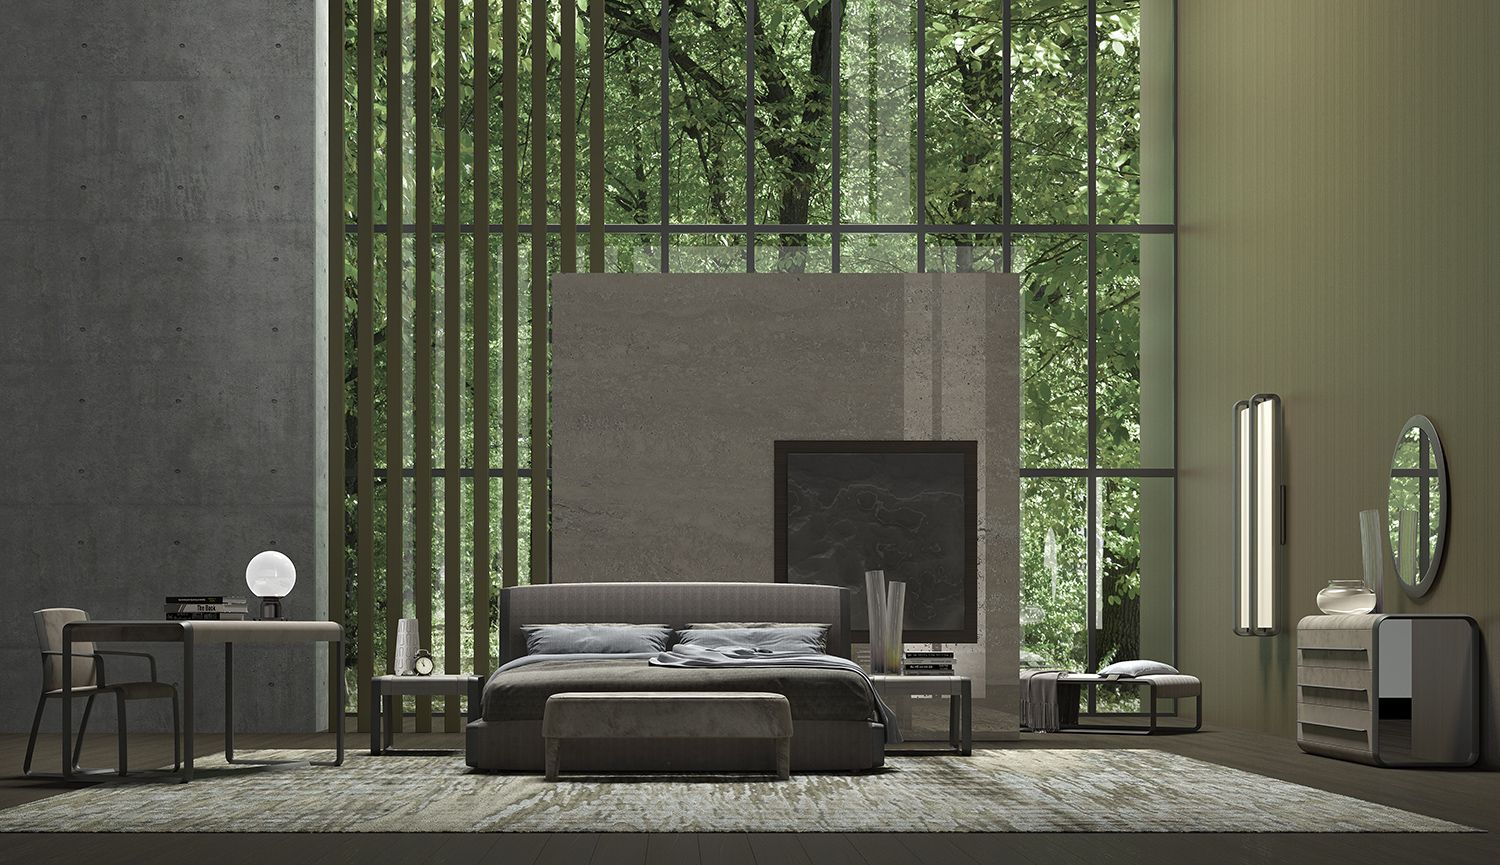 The Warm Suite, the 2021 collection by Gianfranco Ferré Home